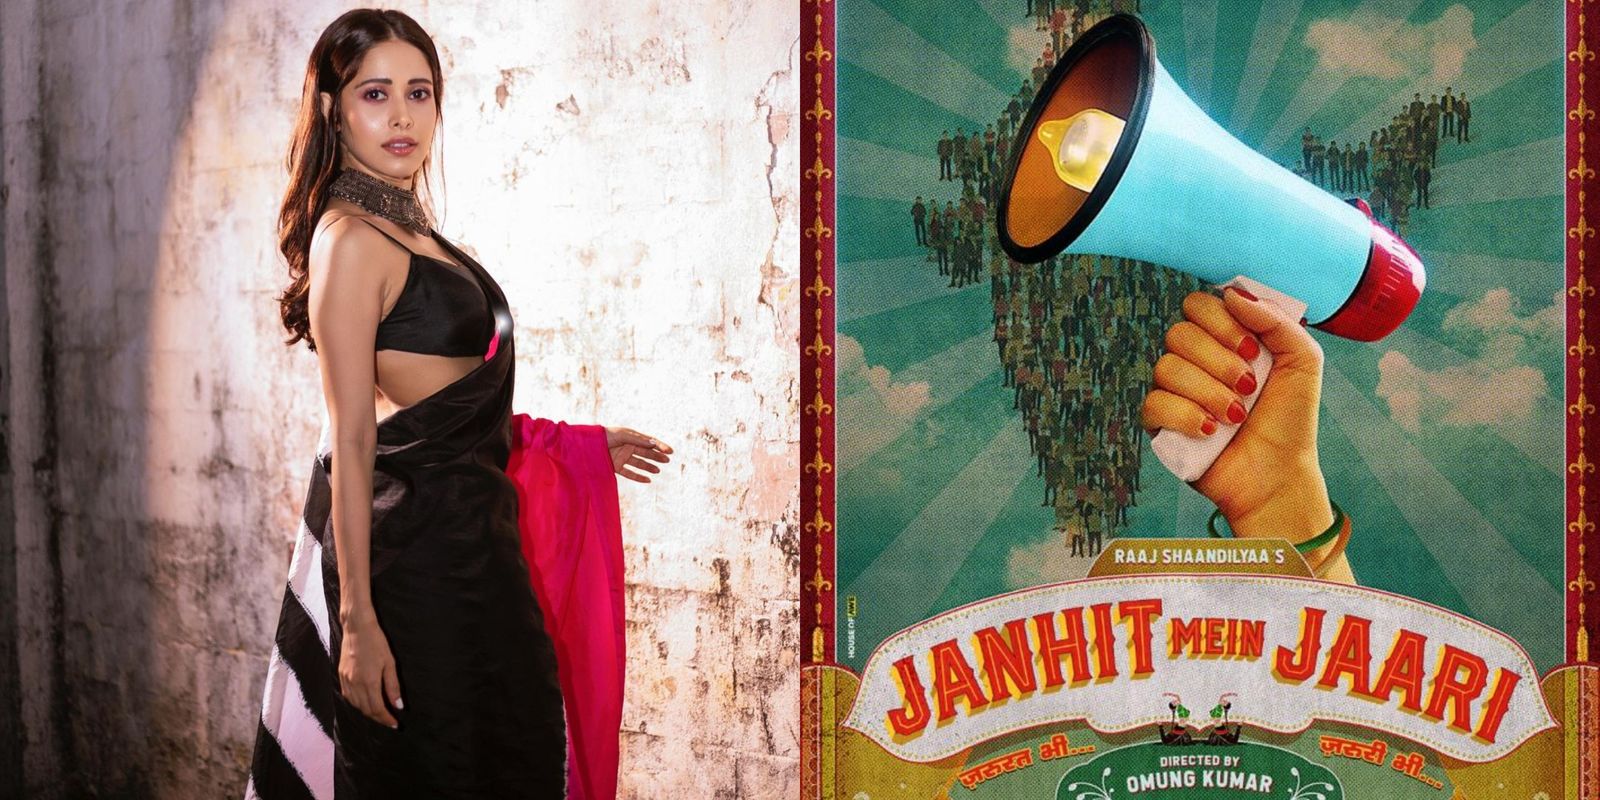 Mary Kom Announces Nushrratt Bharuccha's Next Janhit Mein Jaari With A Quirky Poster, Omung Kumar To Direct